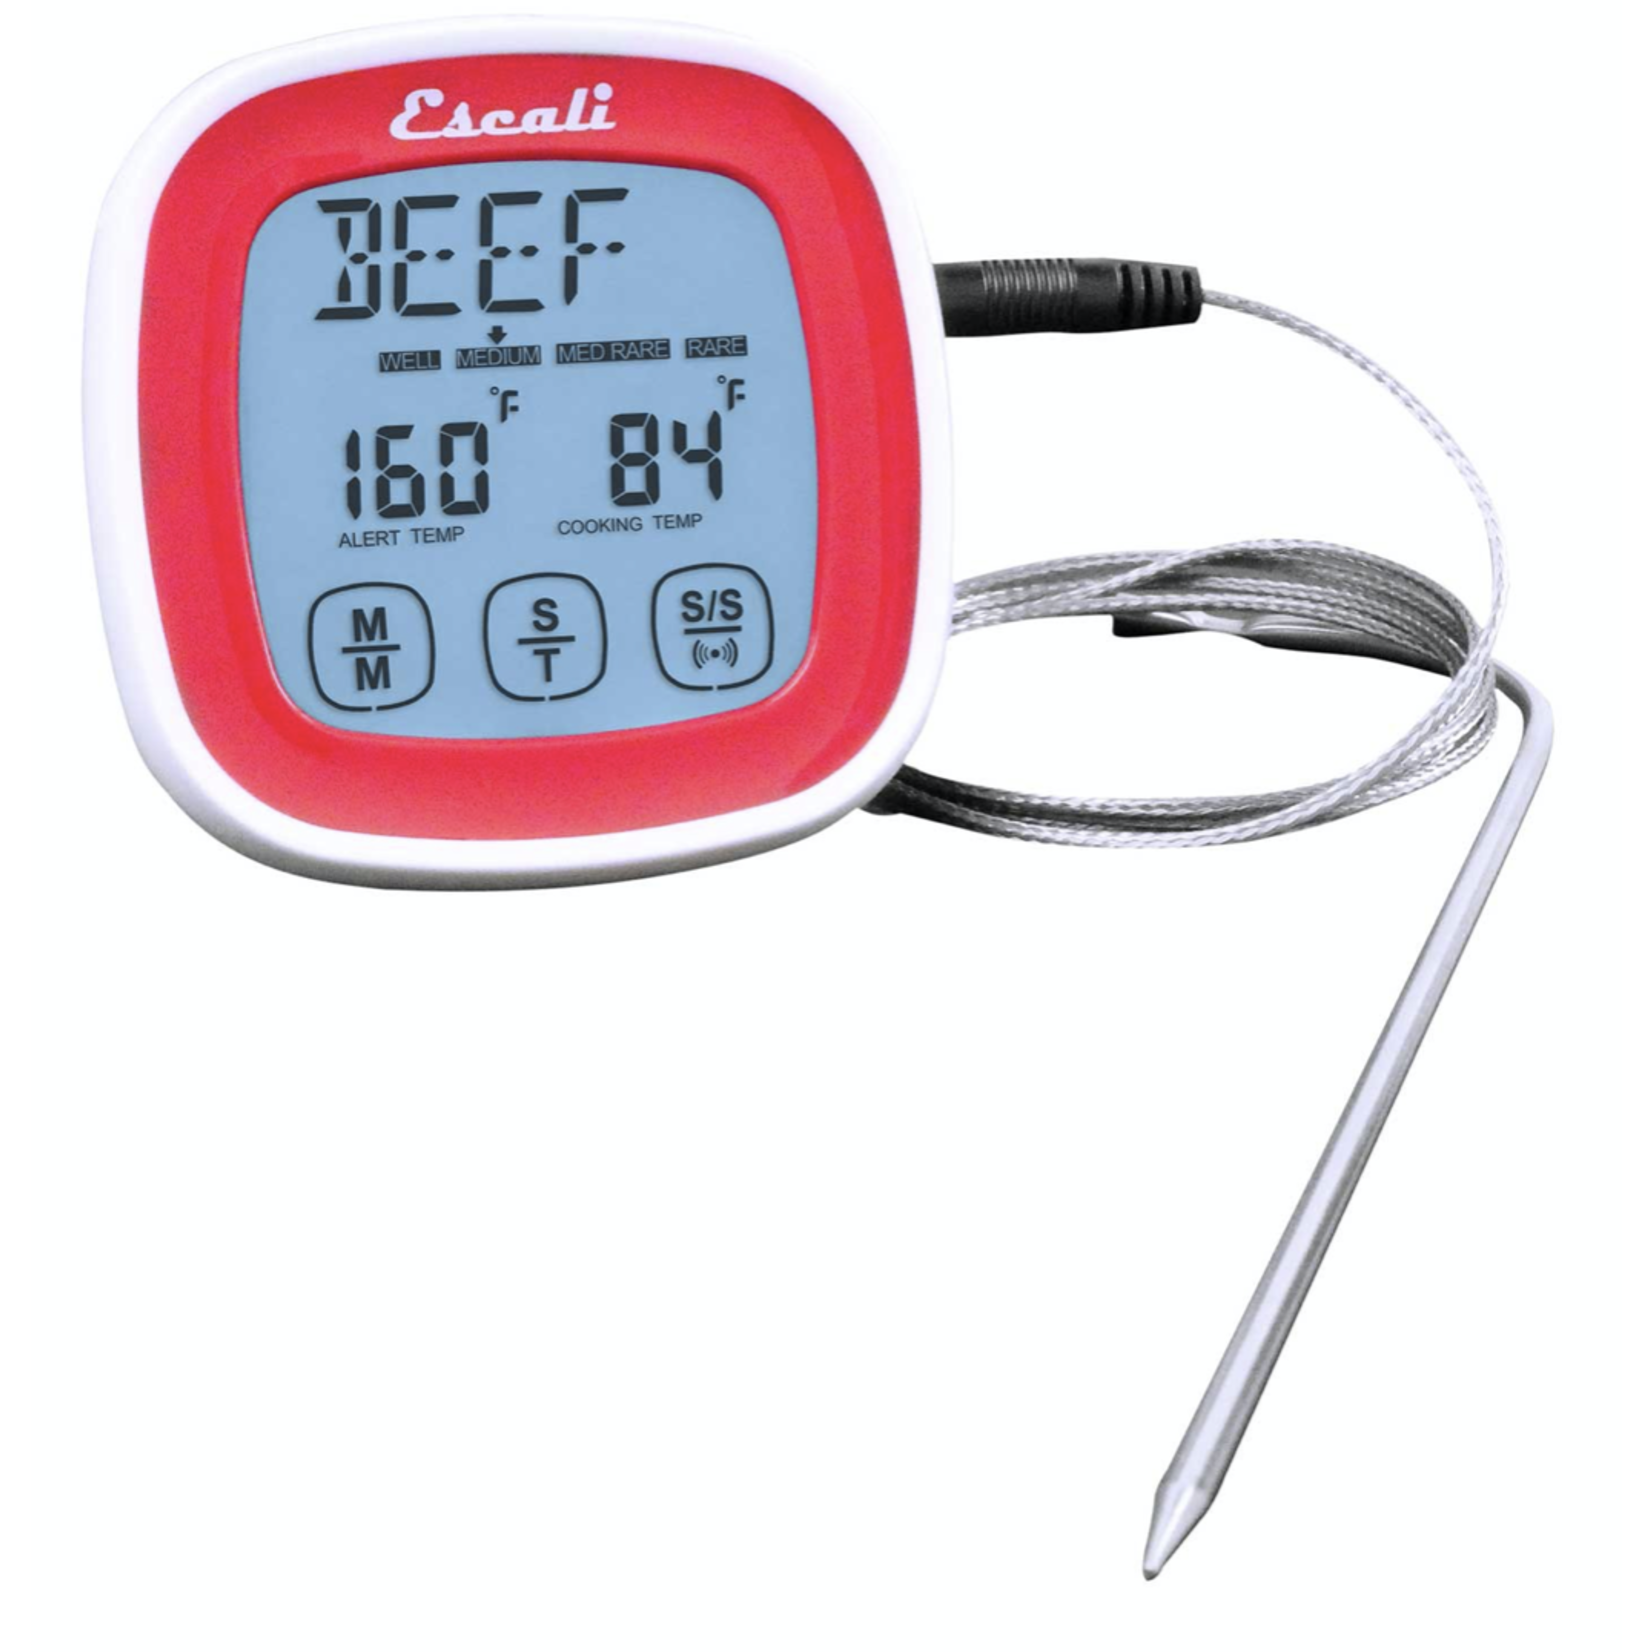 ESCALI ESCALI Touch Screen Thermometer & Timer - Red